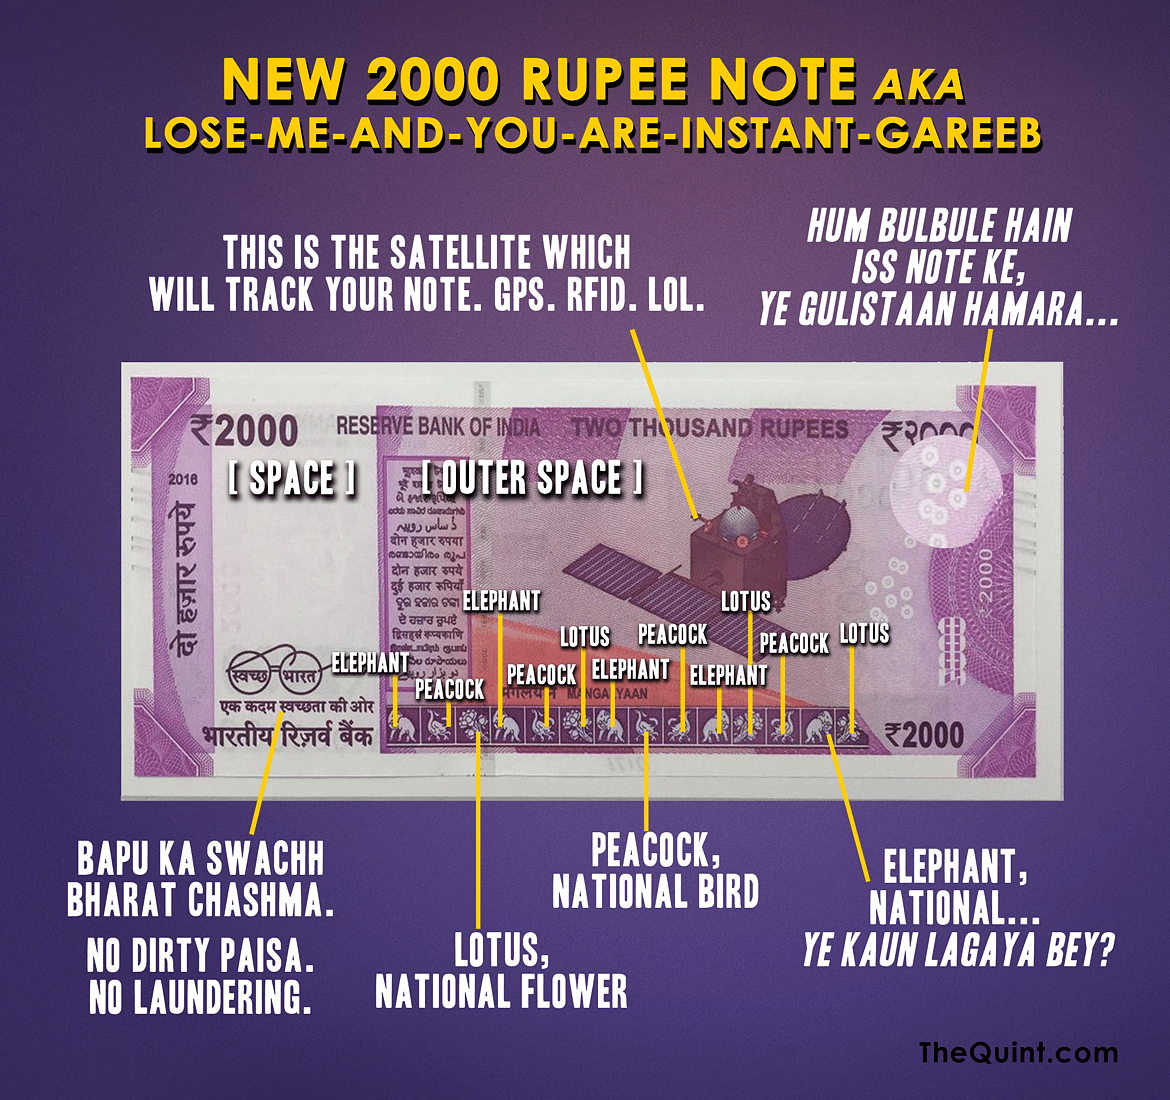 Here’s an honest look at the new Rs 2,000 note. Note kidding.